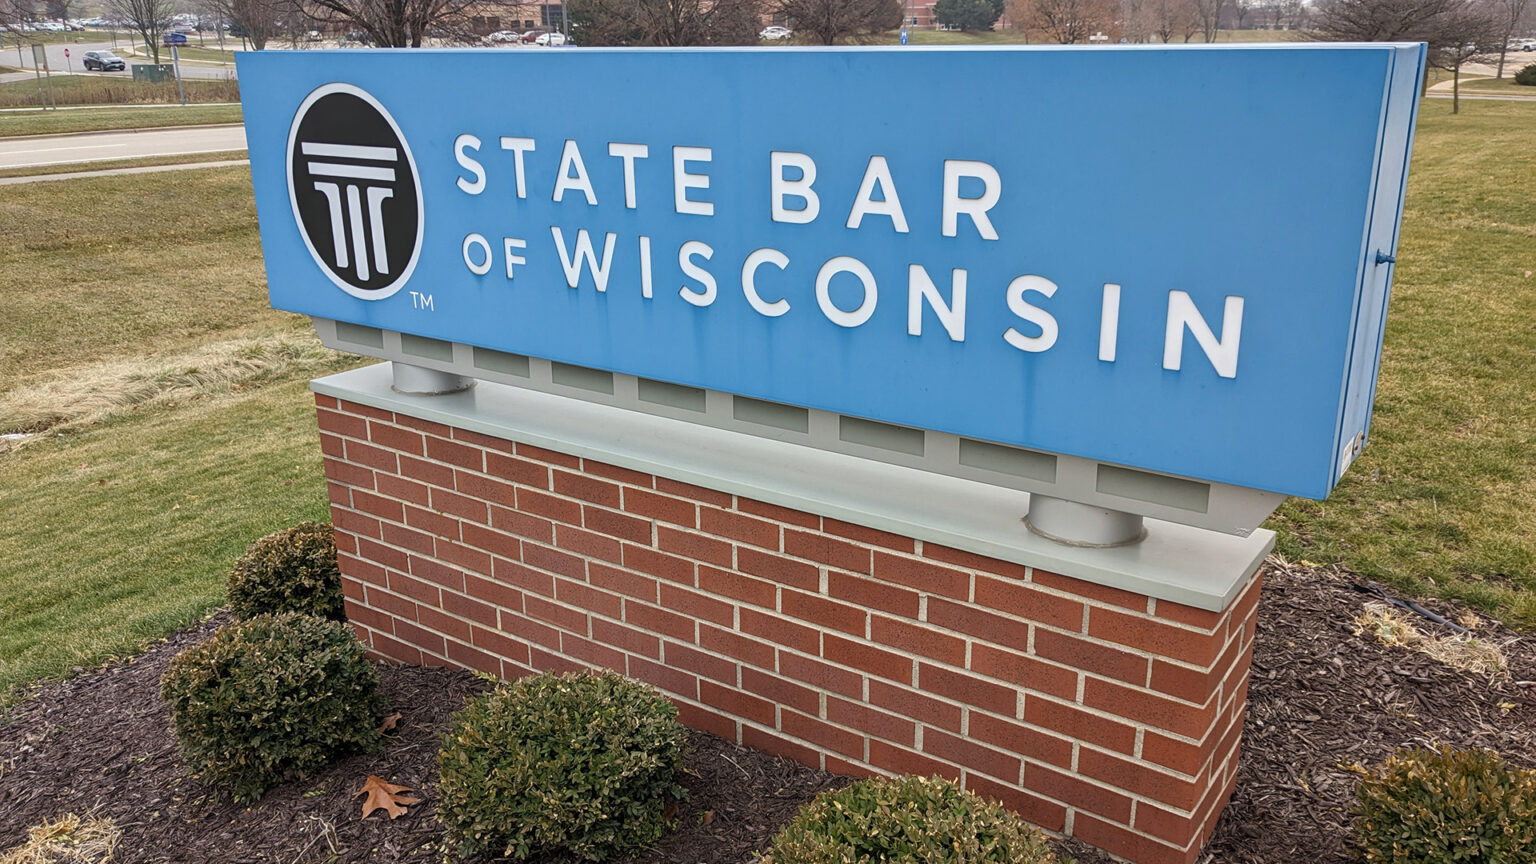 A sign with a stylized logo of a Doric column and the words State Bar of Wisconsin stands on a brick pedestal surrounded by small bushes and mulch in a lawn, with roads, sidewalks and leafless trees in the background.